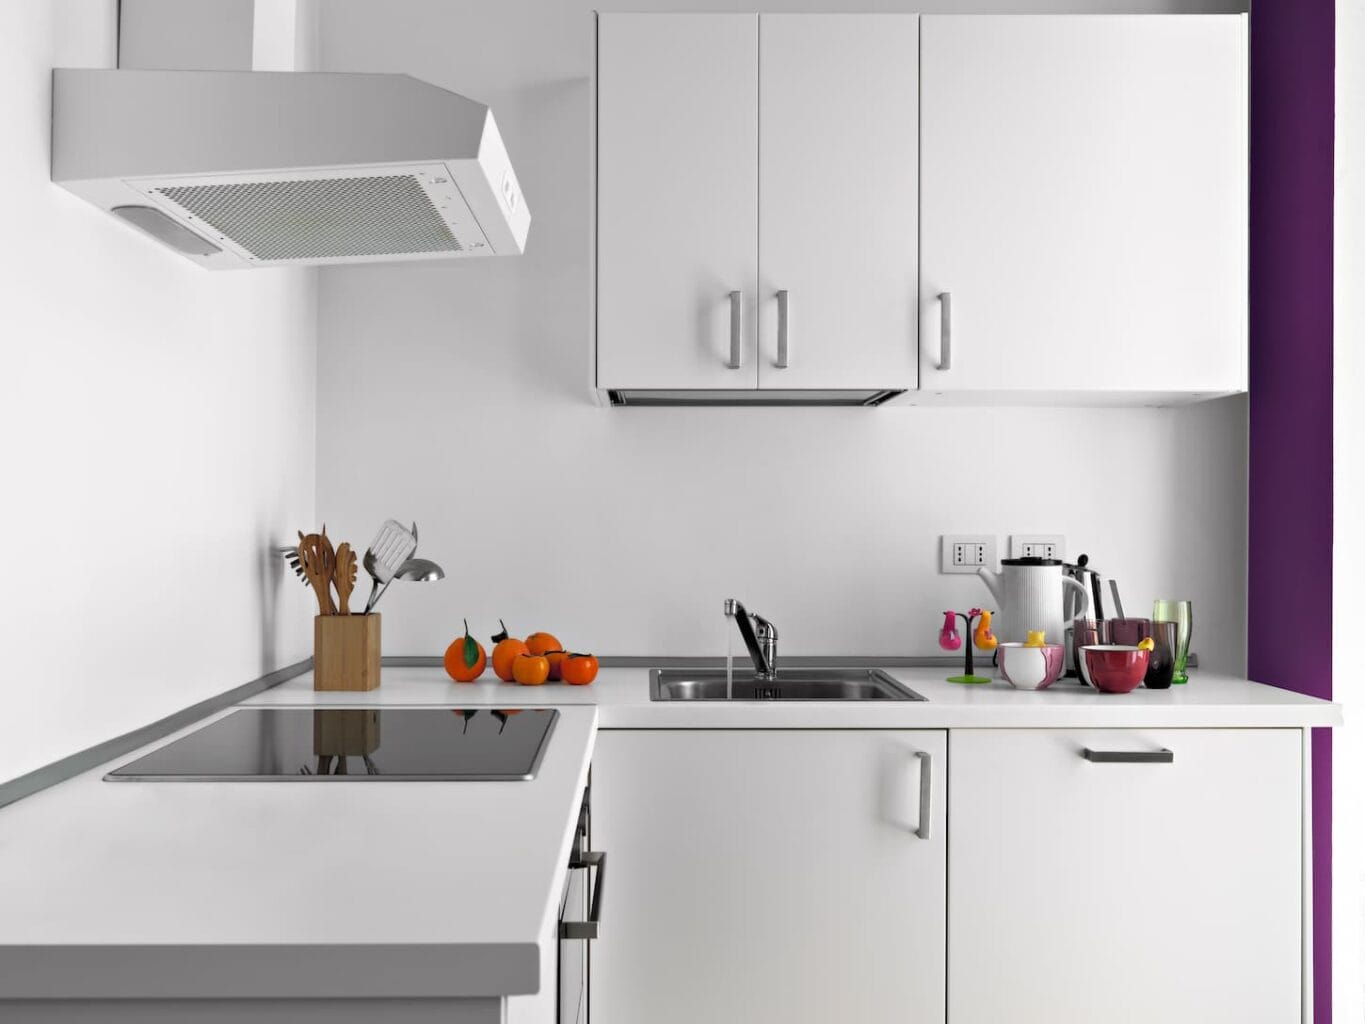 An image of a modern kitchen interior with white furniture.